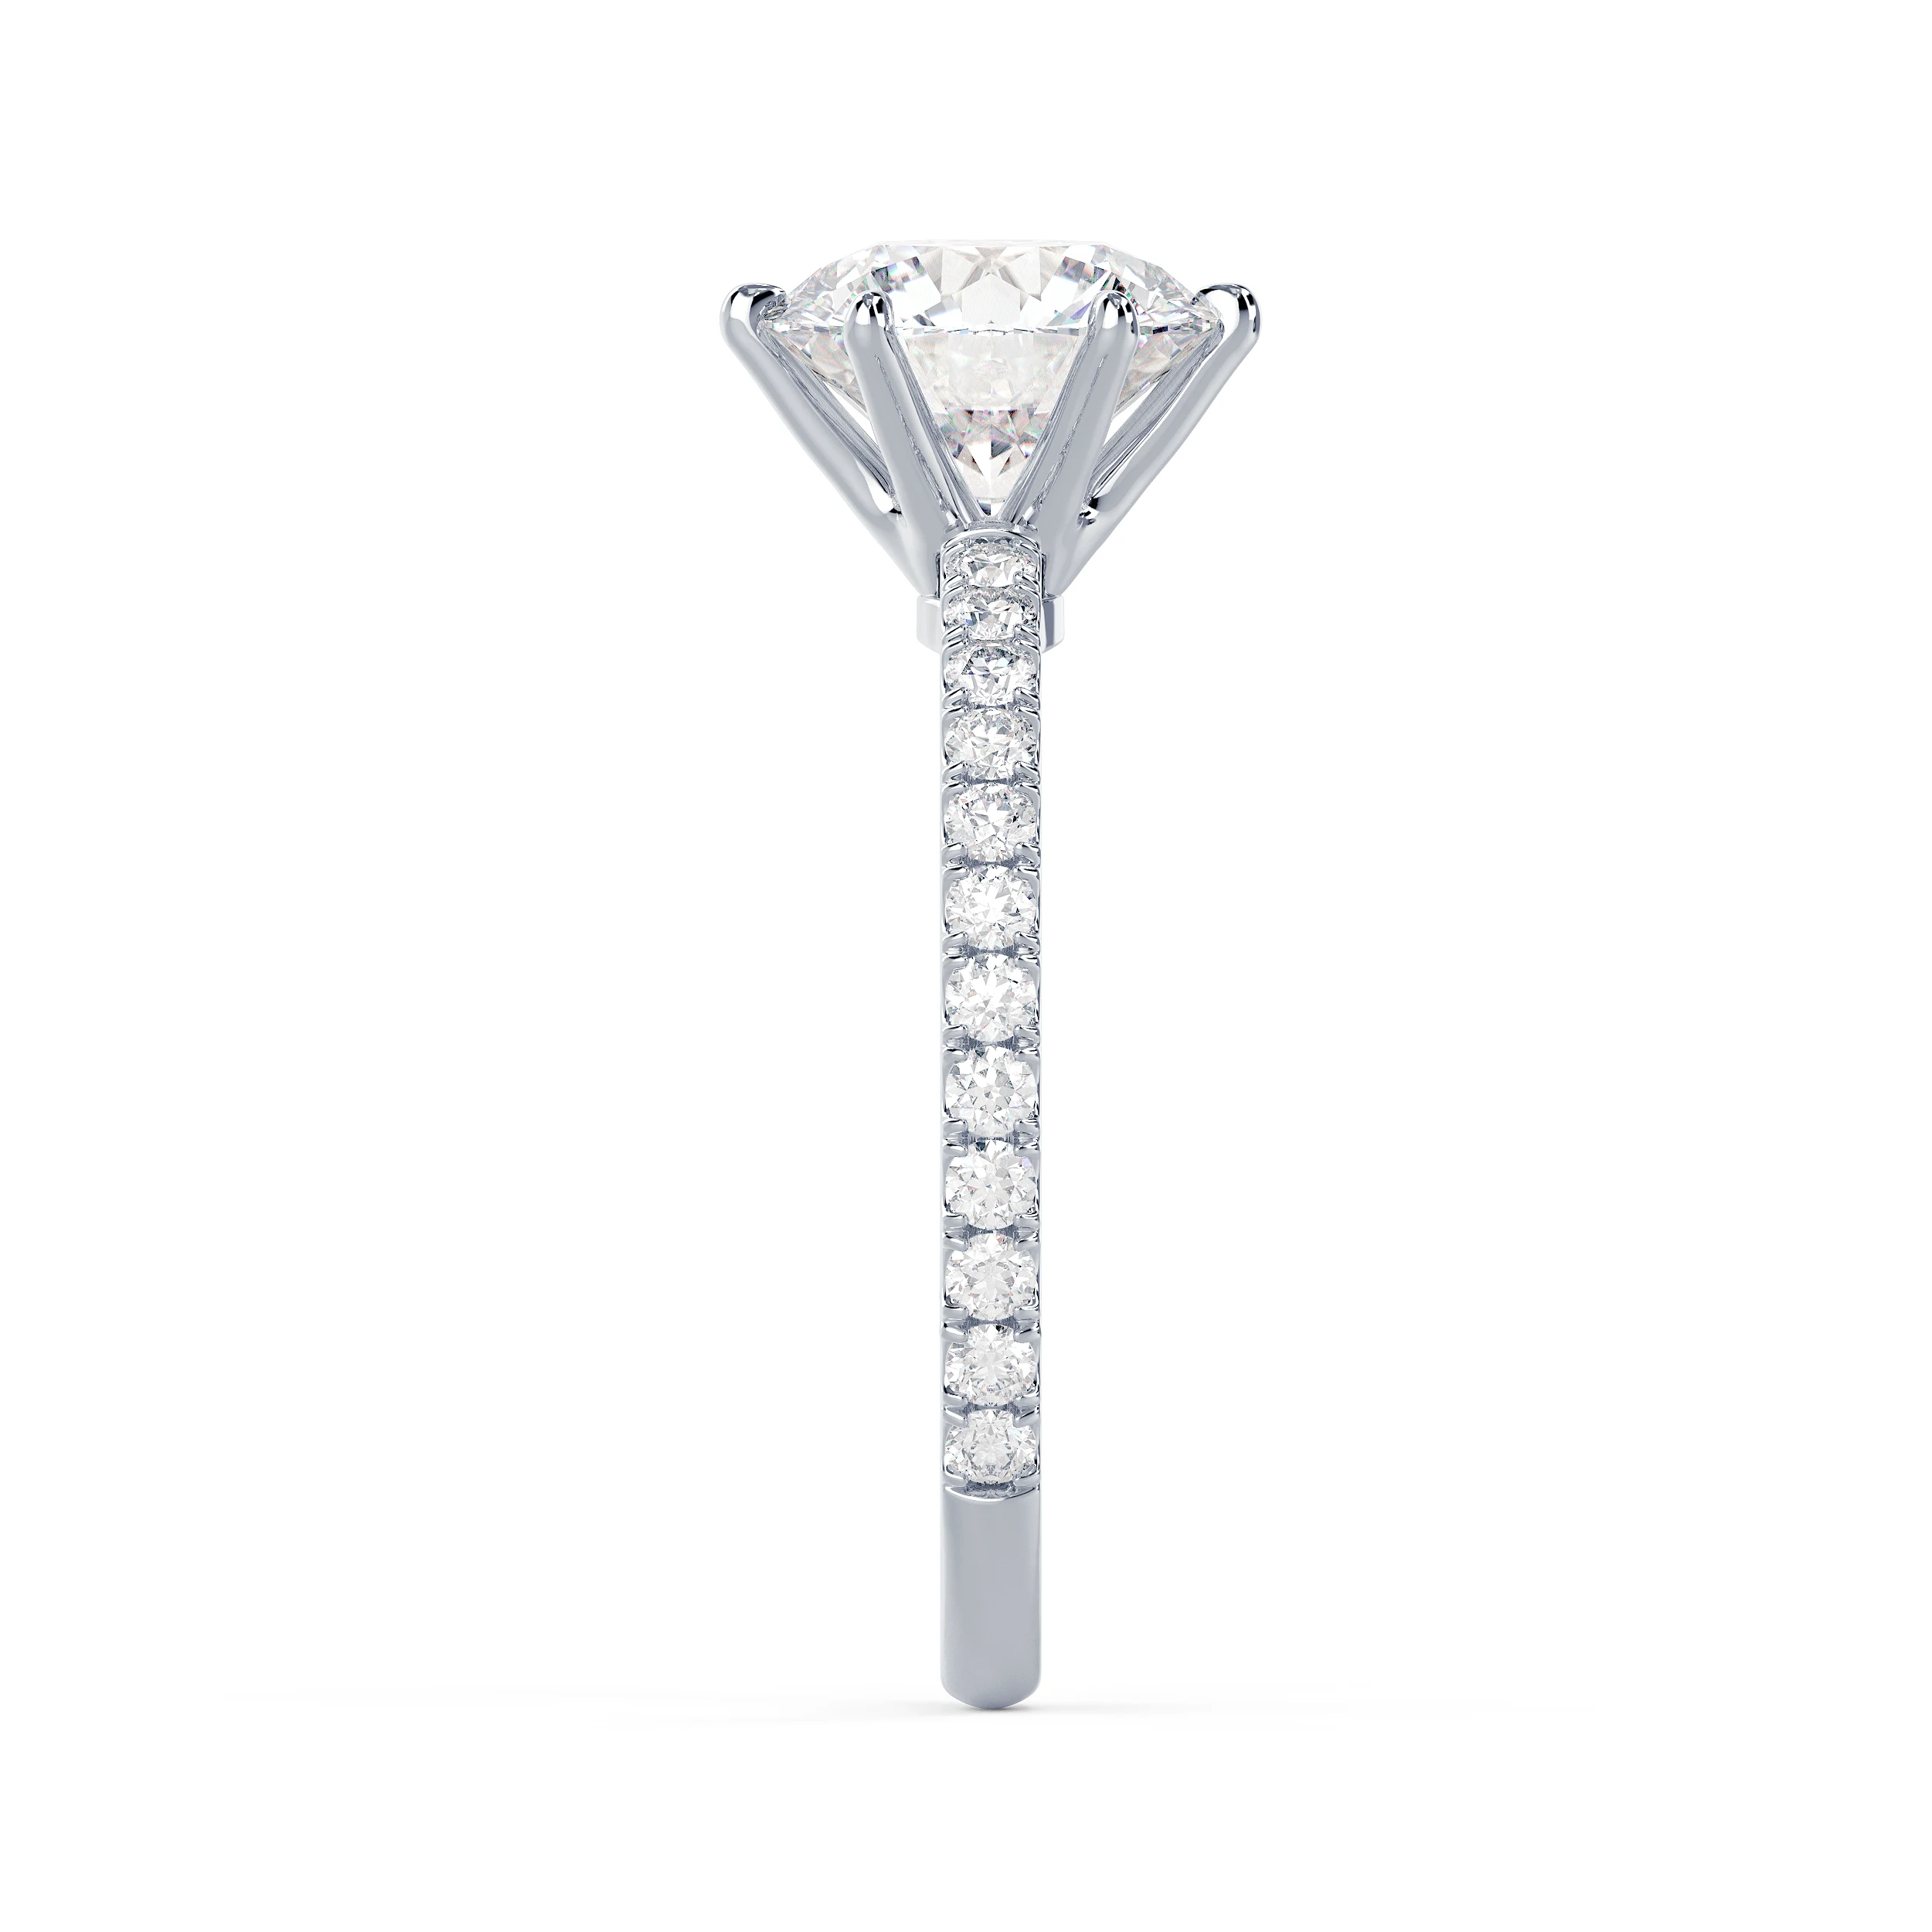 Synthetic Diamonds set in White Gold Round Six Prong Pavé Setting (Side View)